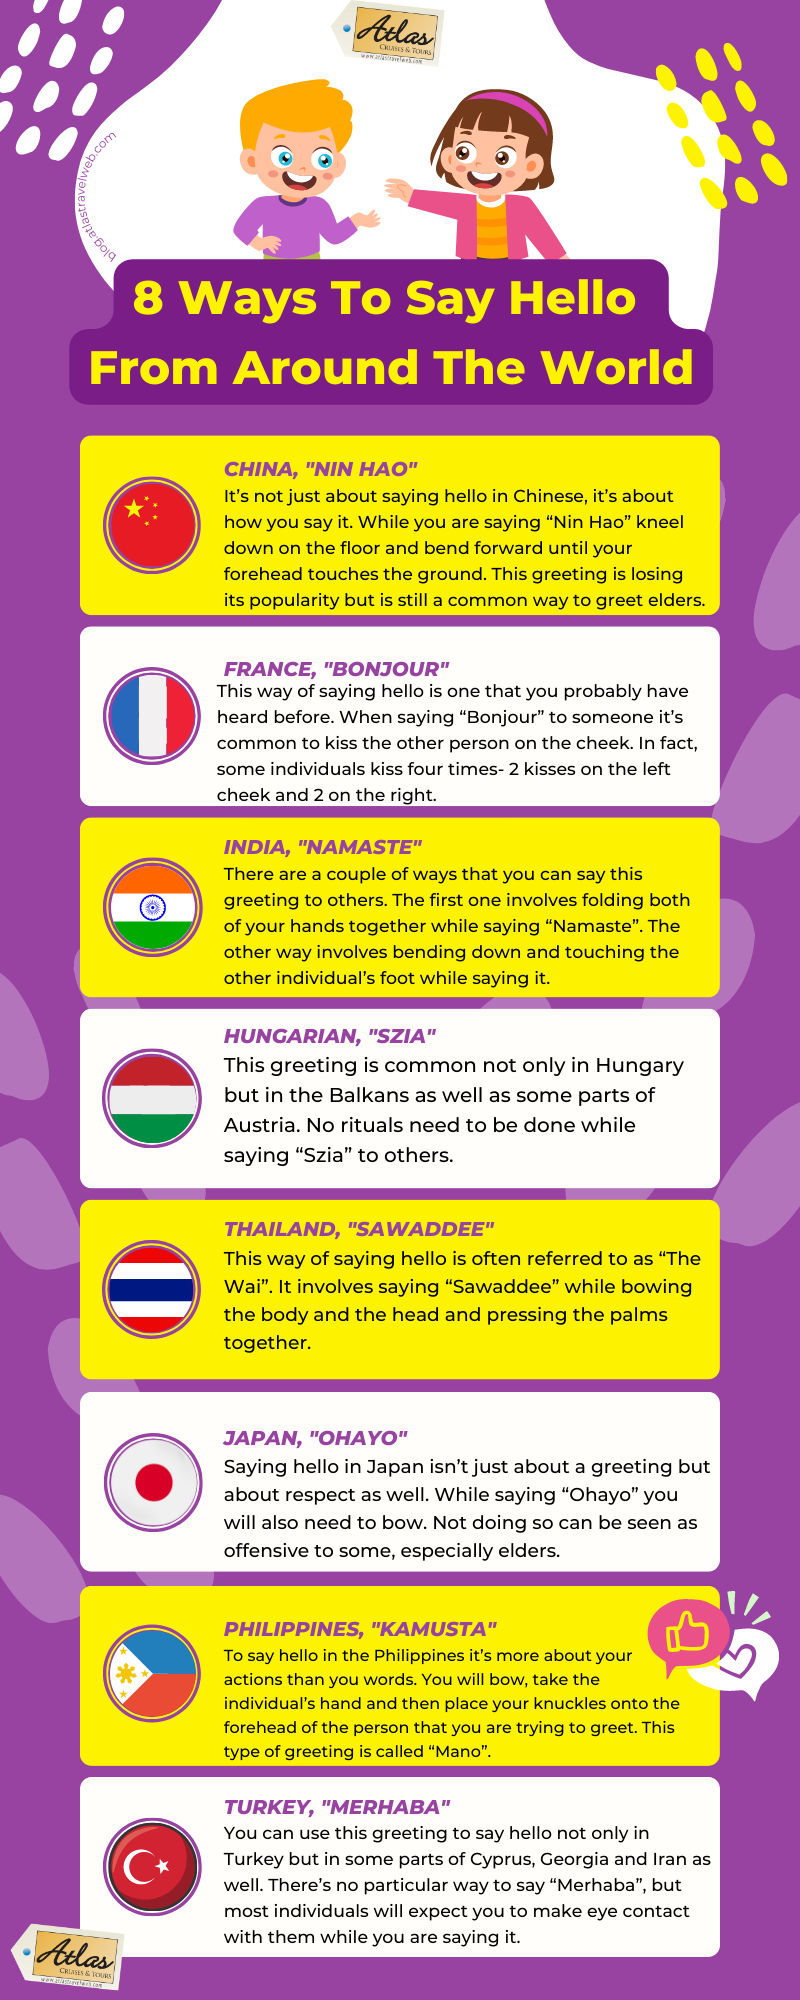 8 Ways To Say Hello From Around The World